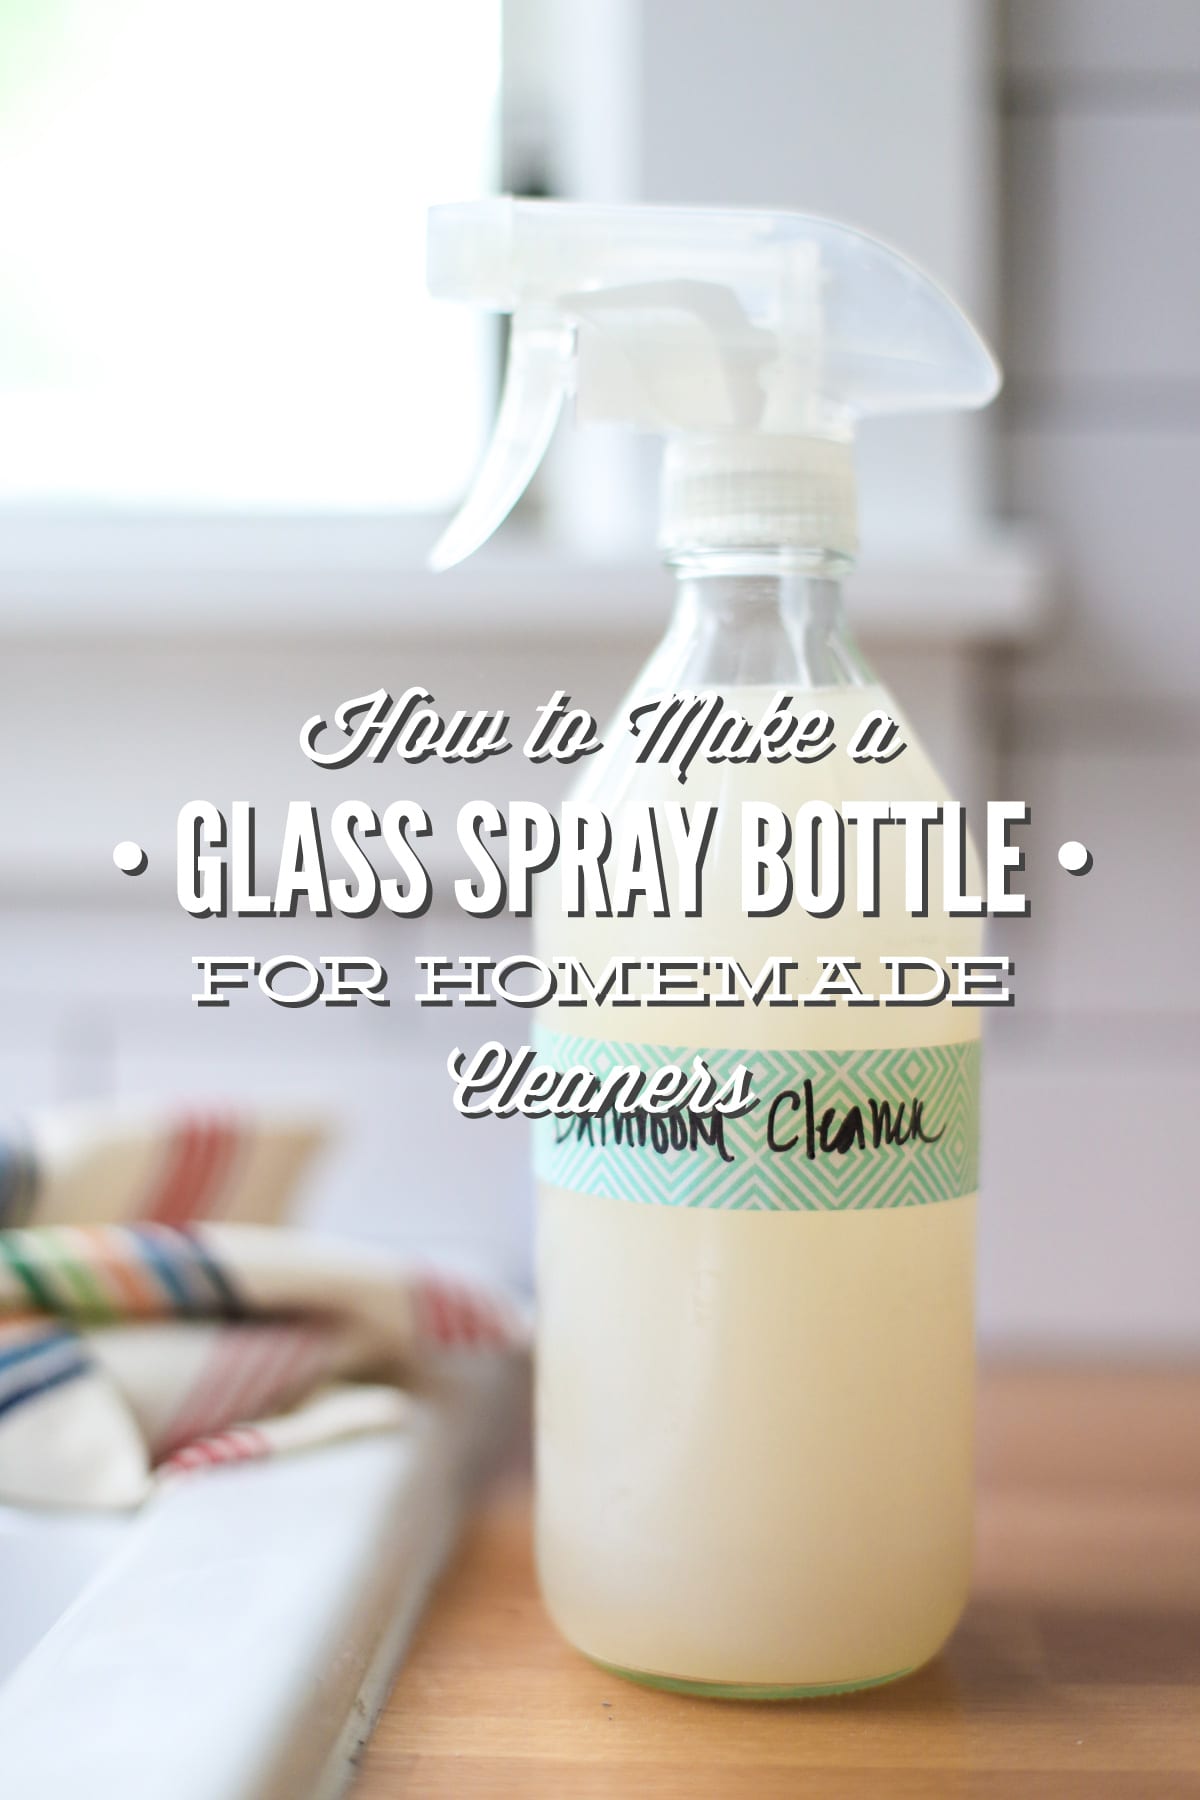 How to Make a Glass Spray Bottle for Homemade Cleaners